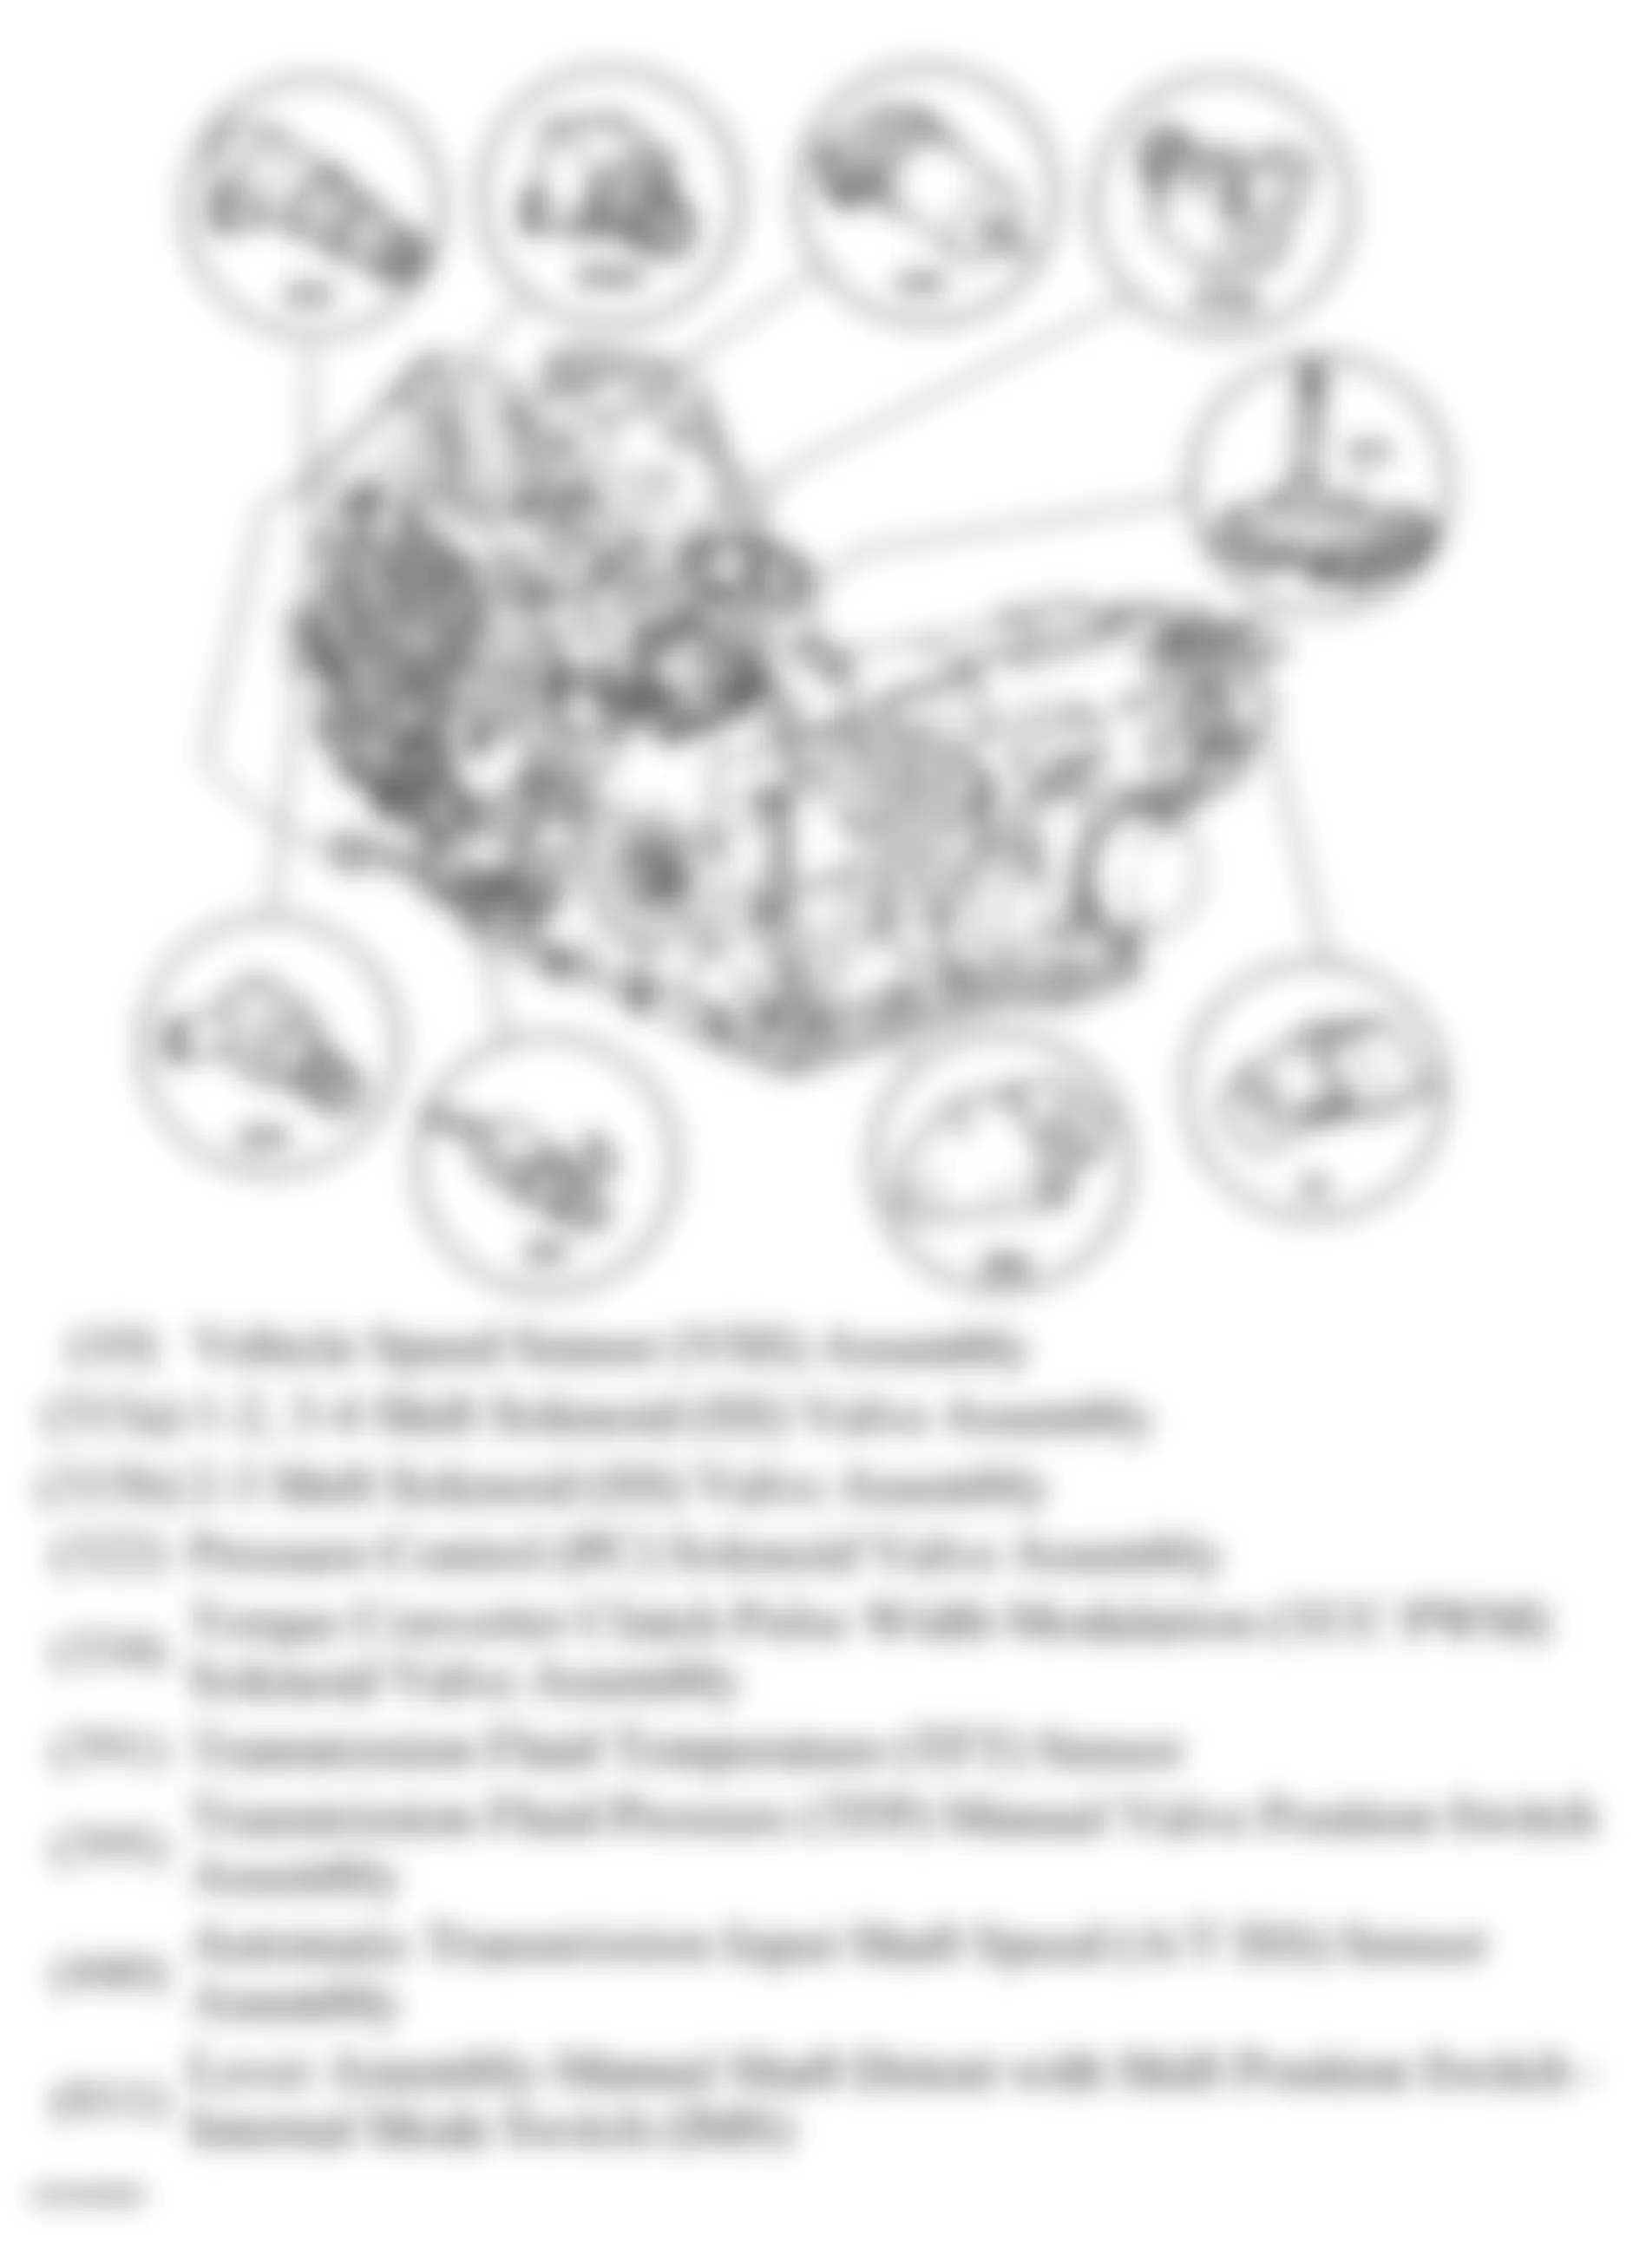 Buick Rendezvous CXL 2006 - Component Locations -  Transmission Assembly